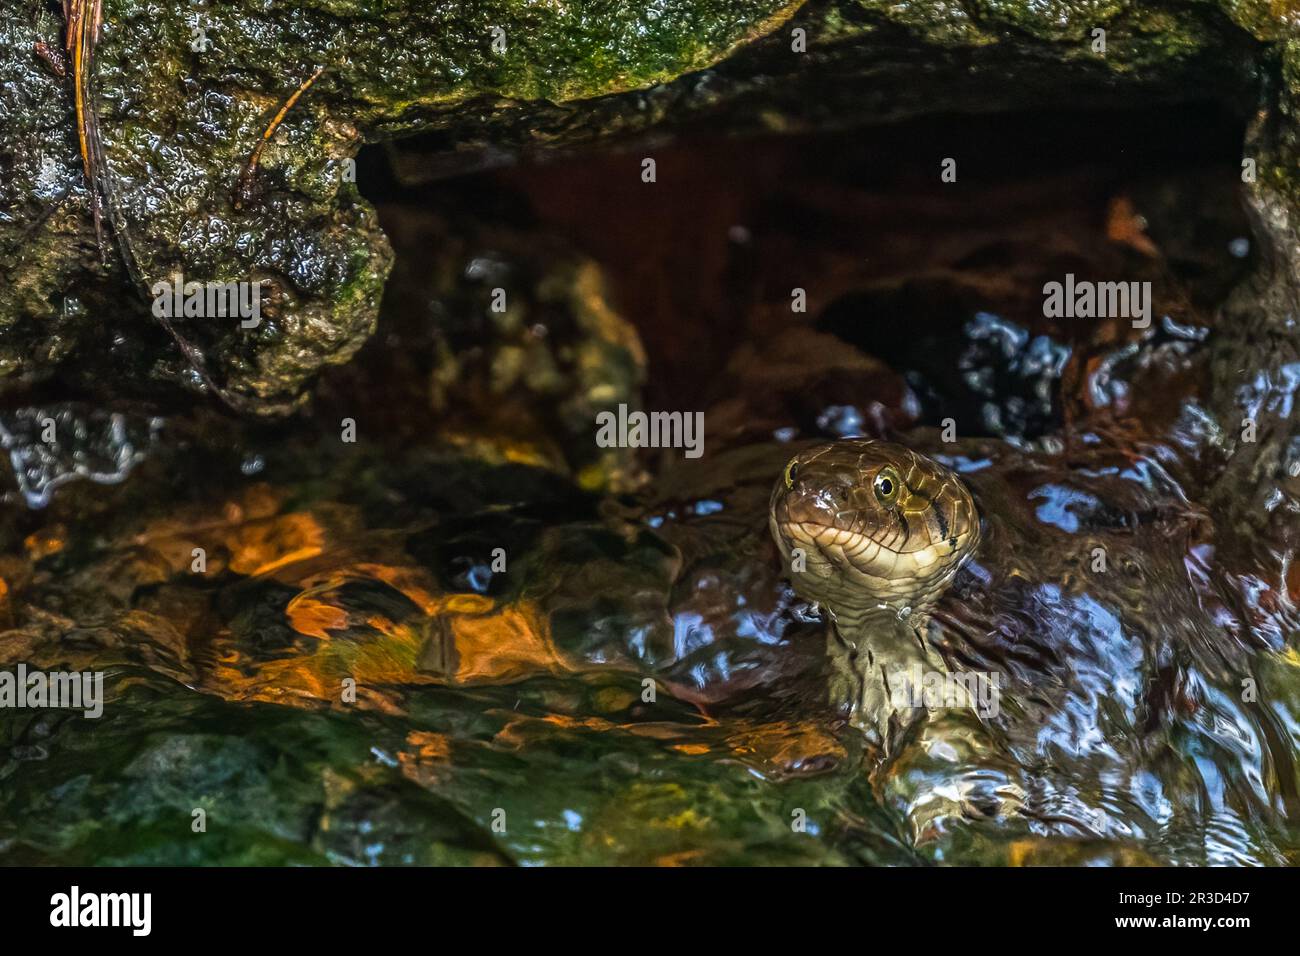 A water snake looking up from water Stock Photo